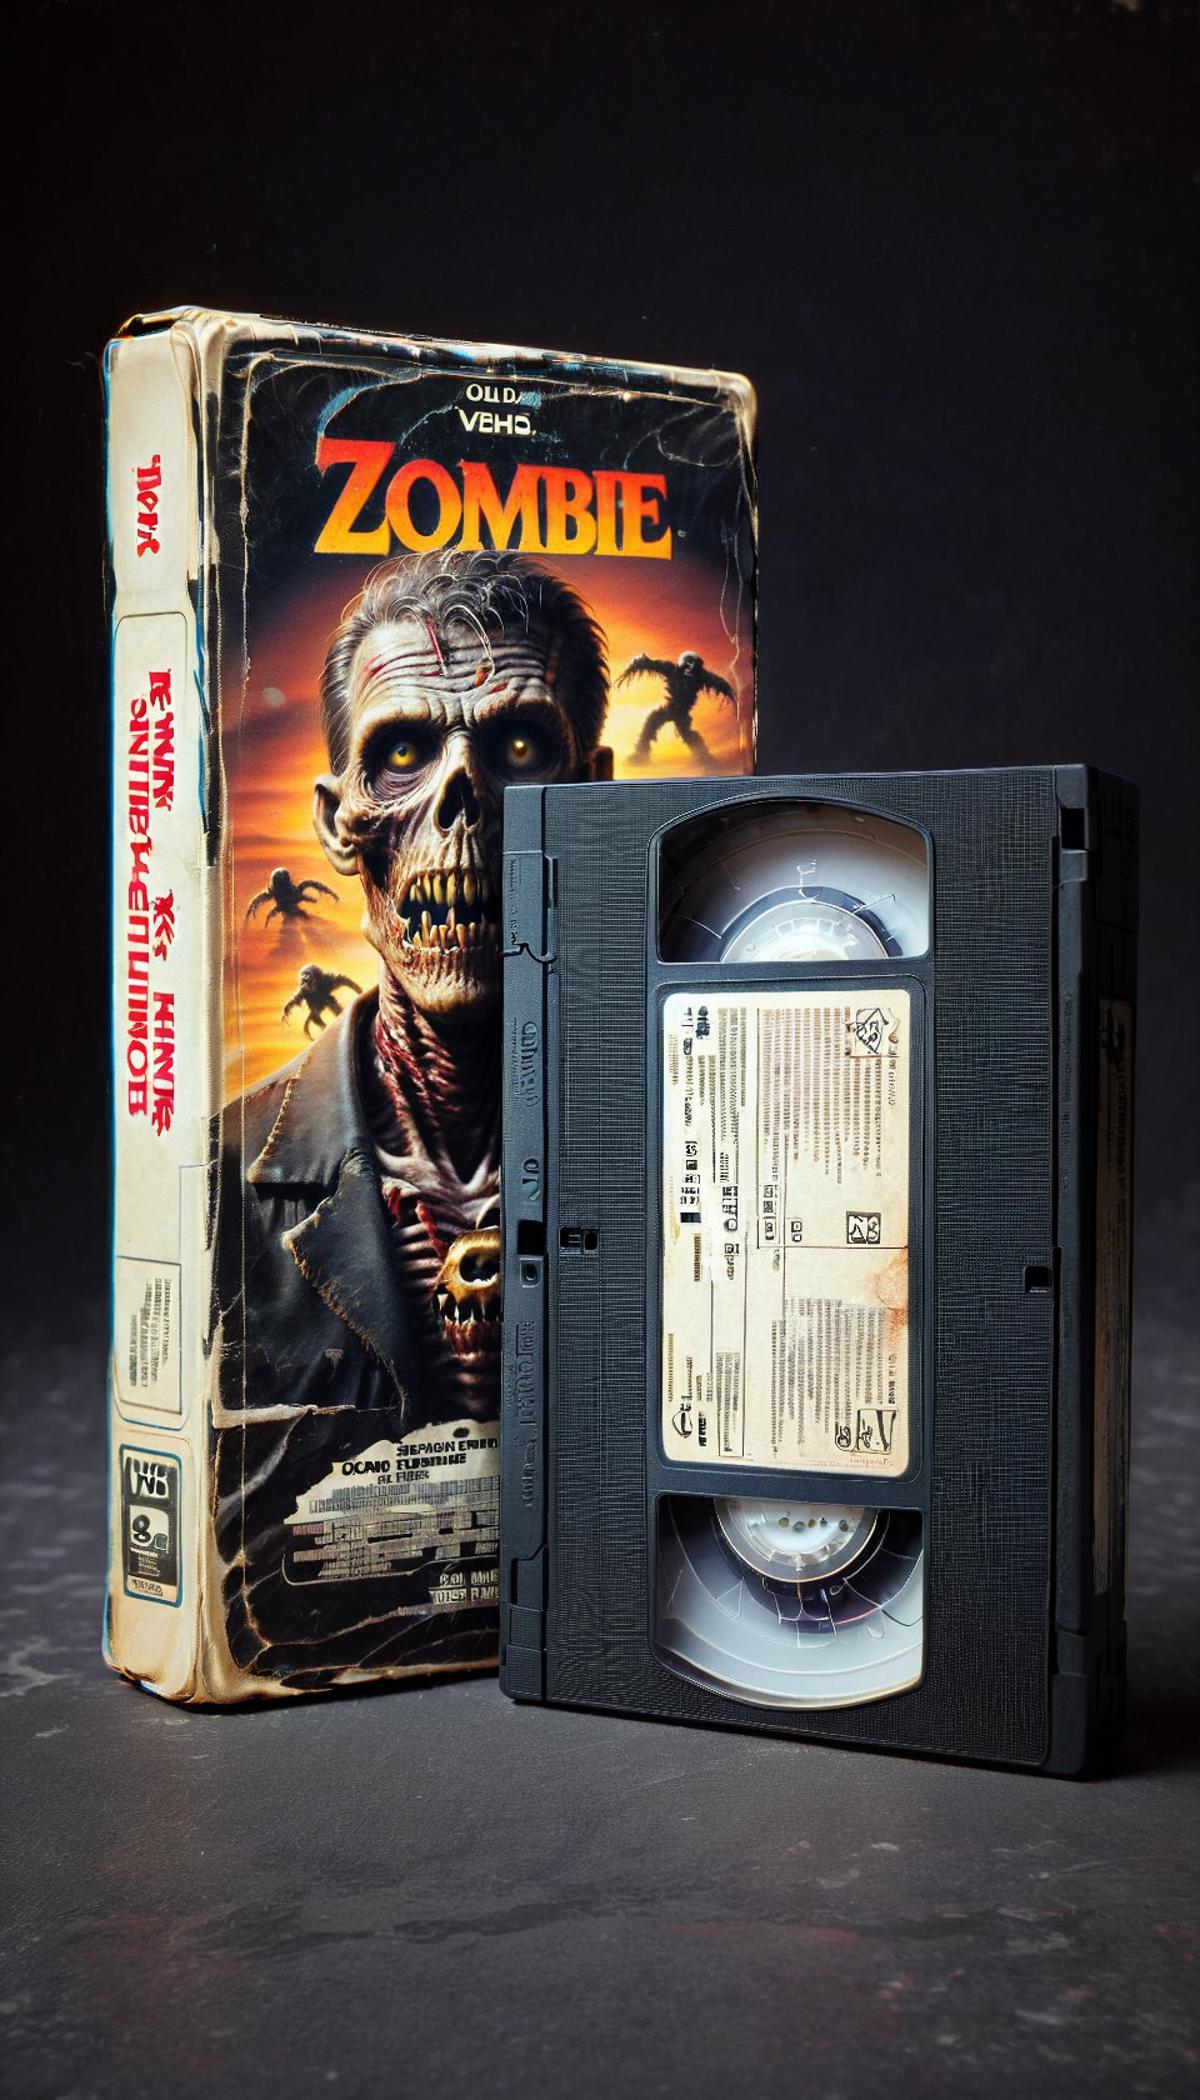 A Zombie movie cassette tape with the case.